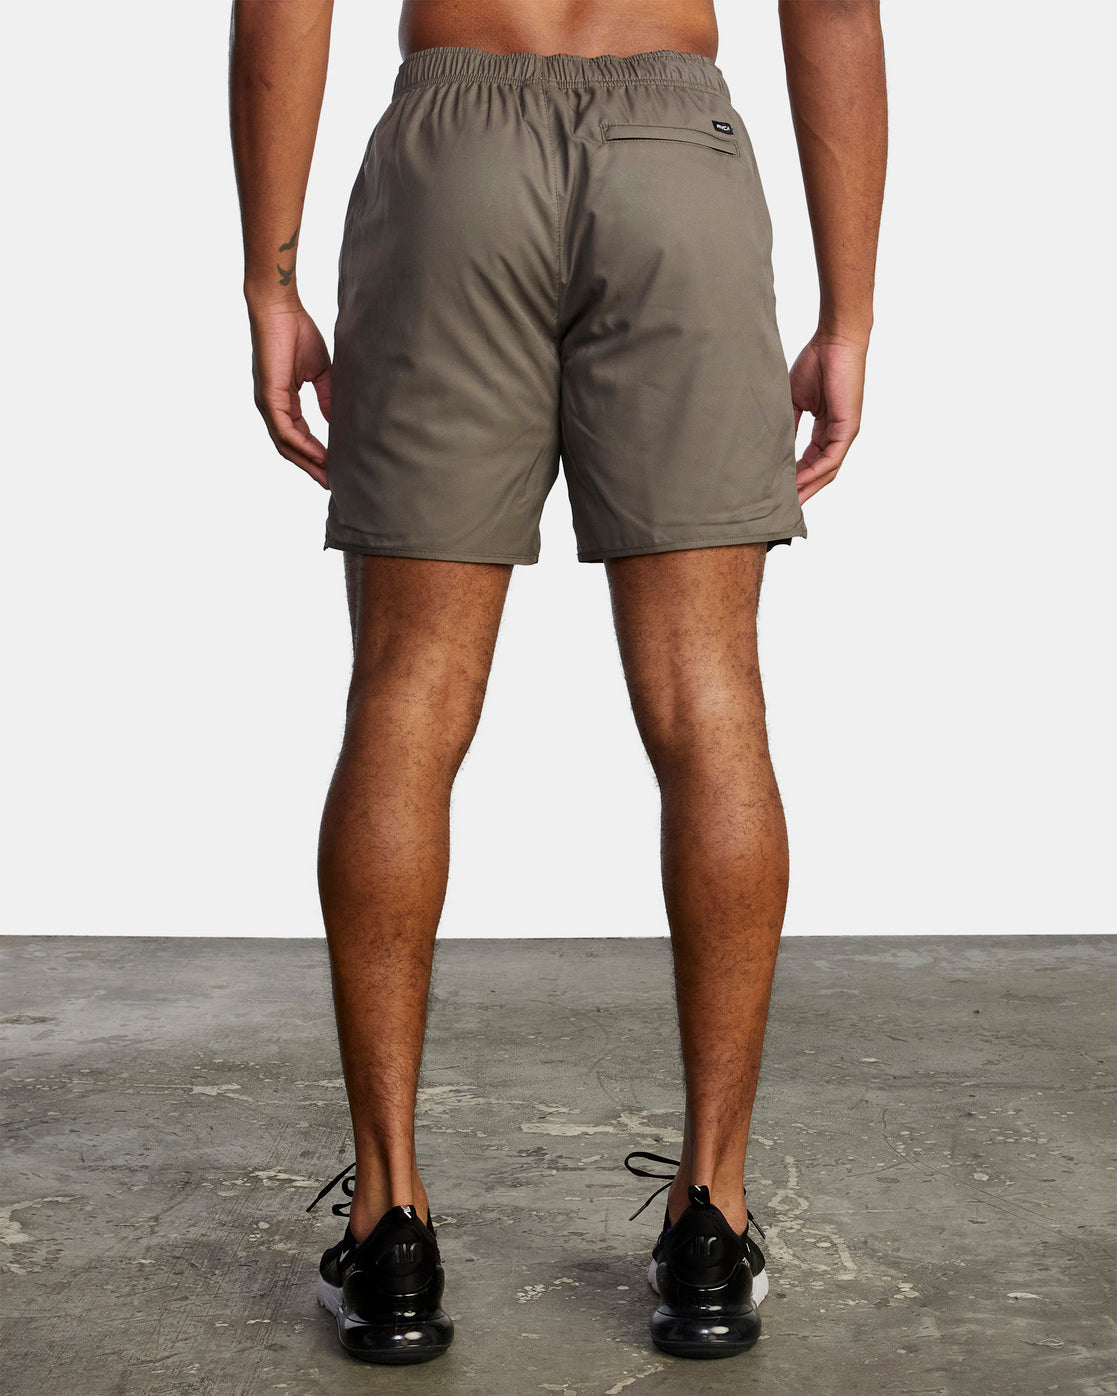 RVCA YOGGER IV Work – SHORT - It MSH Out